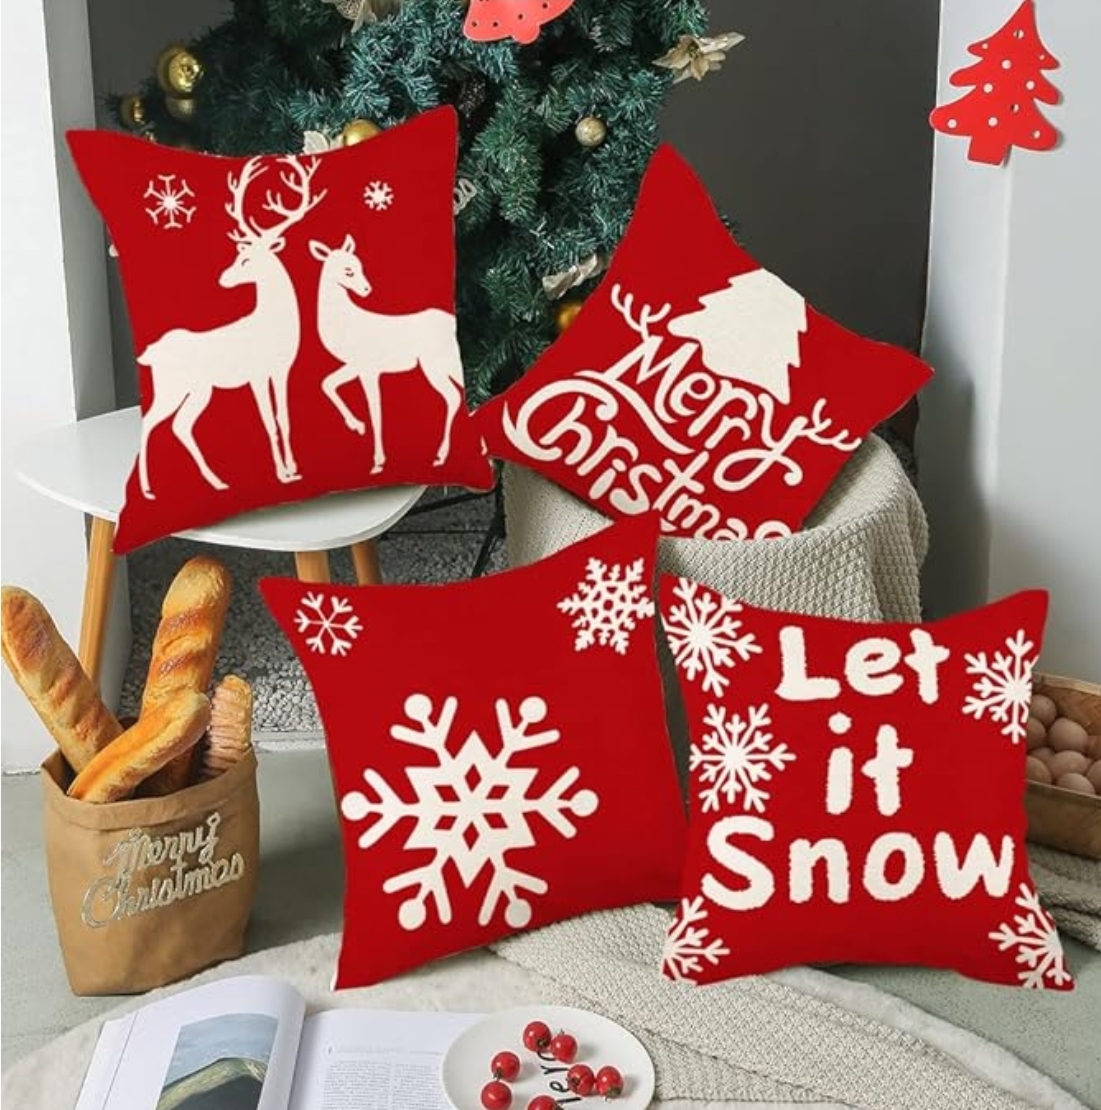 LAXEUYO Pack of 4 Quality Christmas Cushion Covers. Fun 18×18 Cotton and Linen Santa Claus elk Cartoon Covers